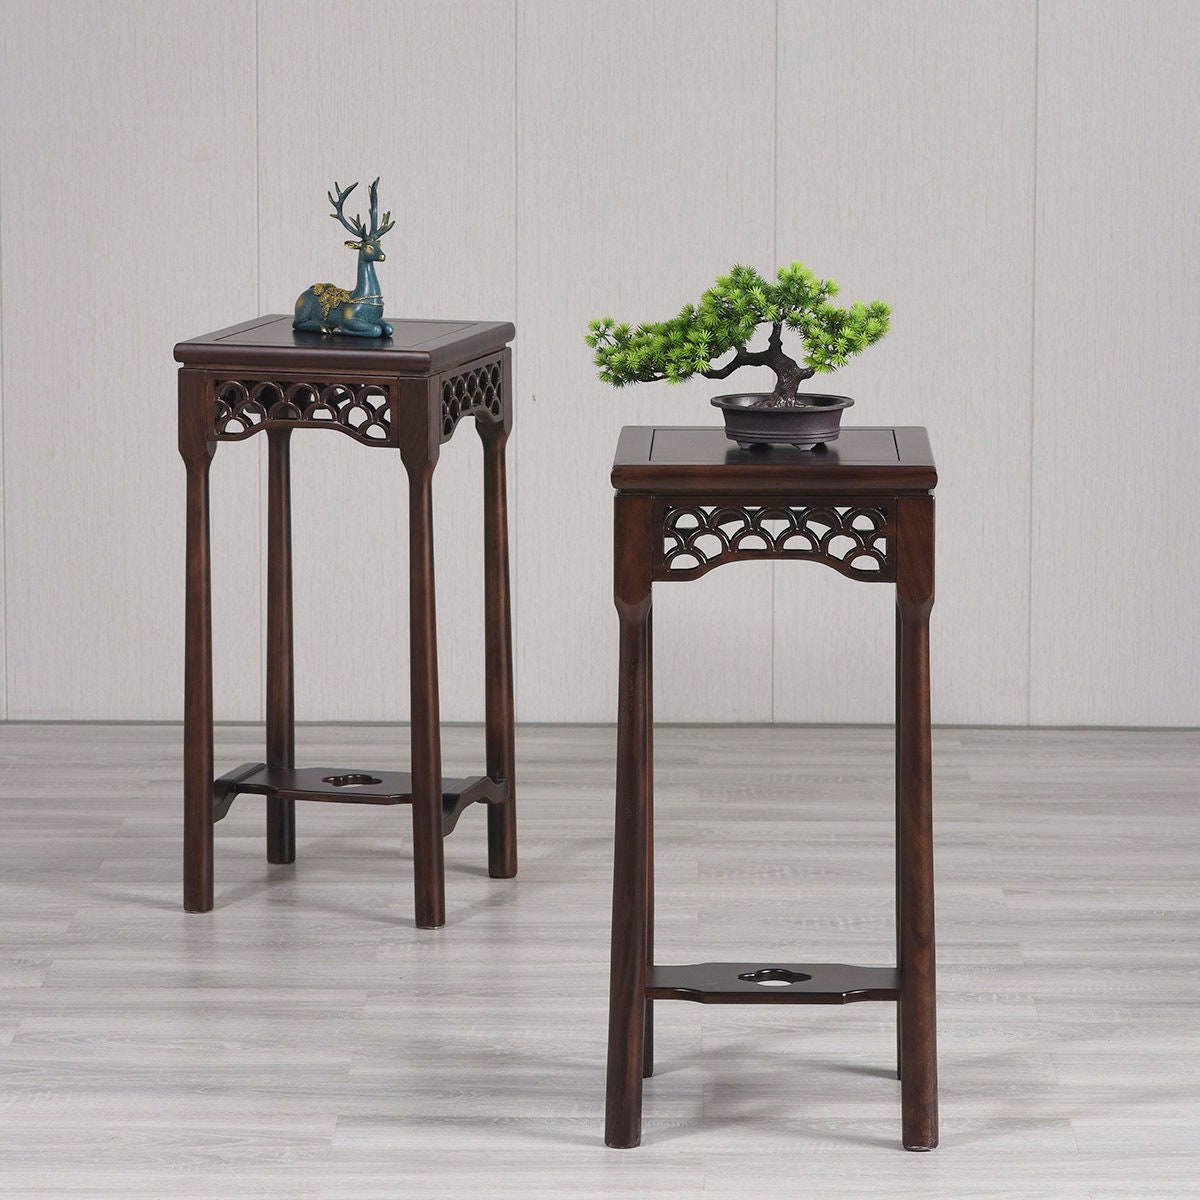 carving flower plant stand, carving tall stand, square plant stand, Wooden Plant Stand made from zebra wood - SlabstudioHongKong